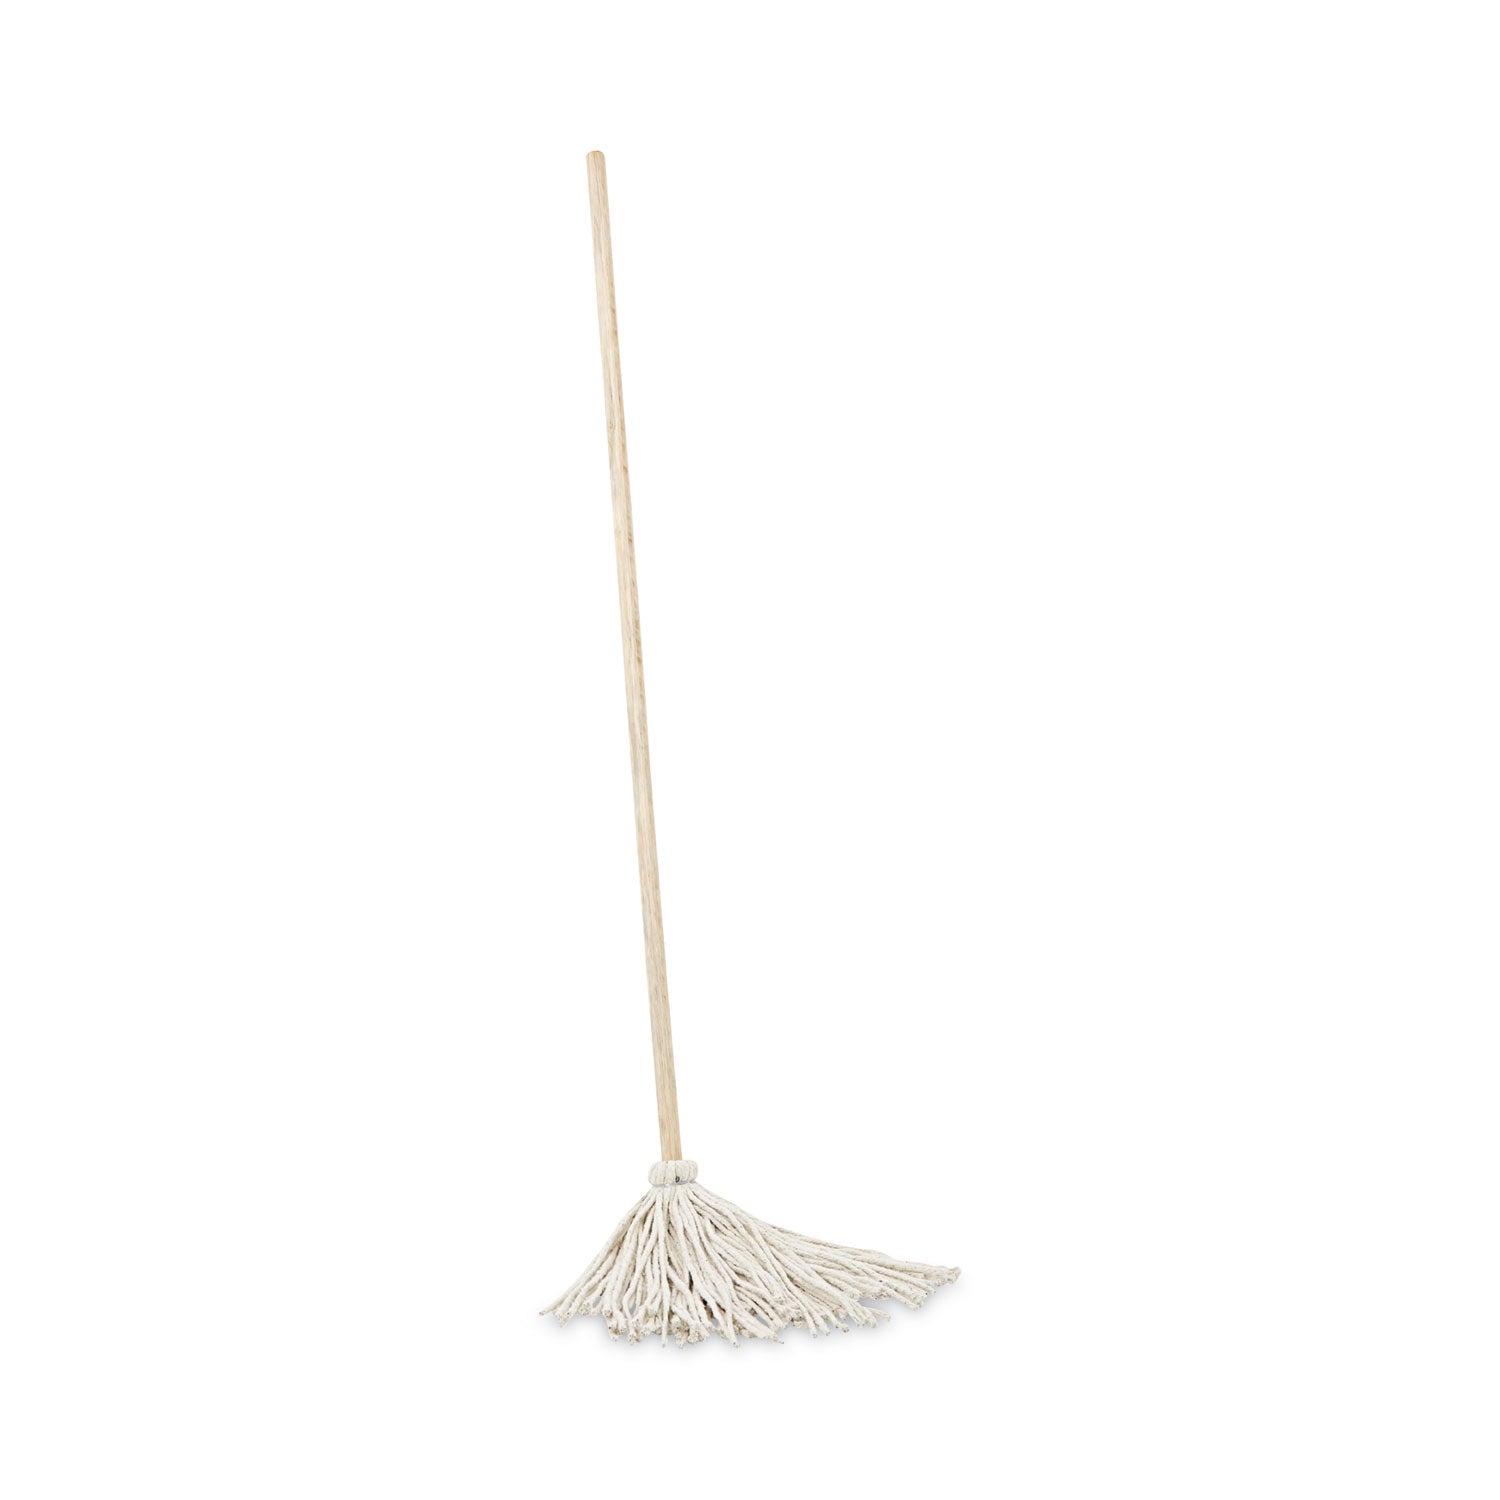 Handle/Deck Mops, #12 White Cotton Head, 48" Natural Wood Handle, 6/Pack - 